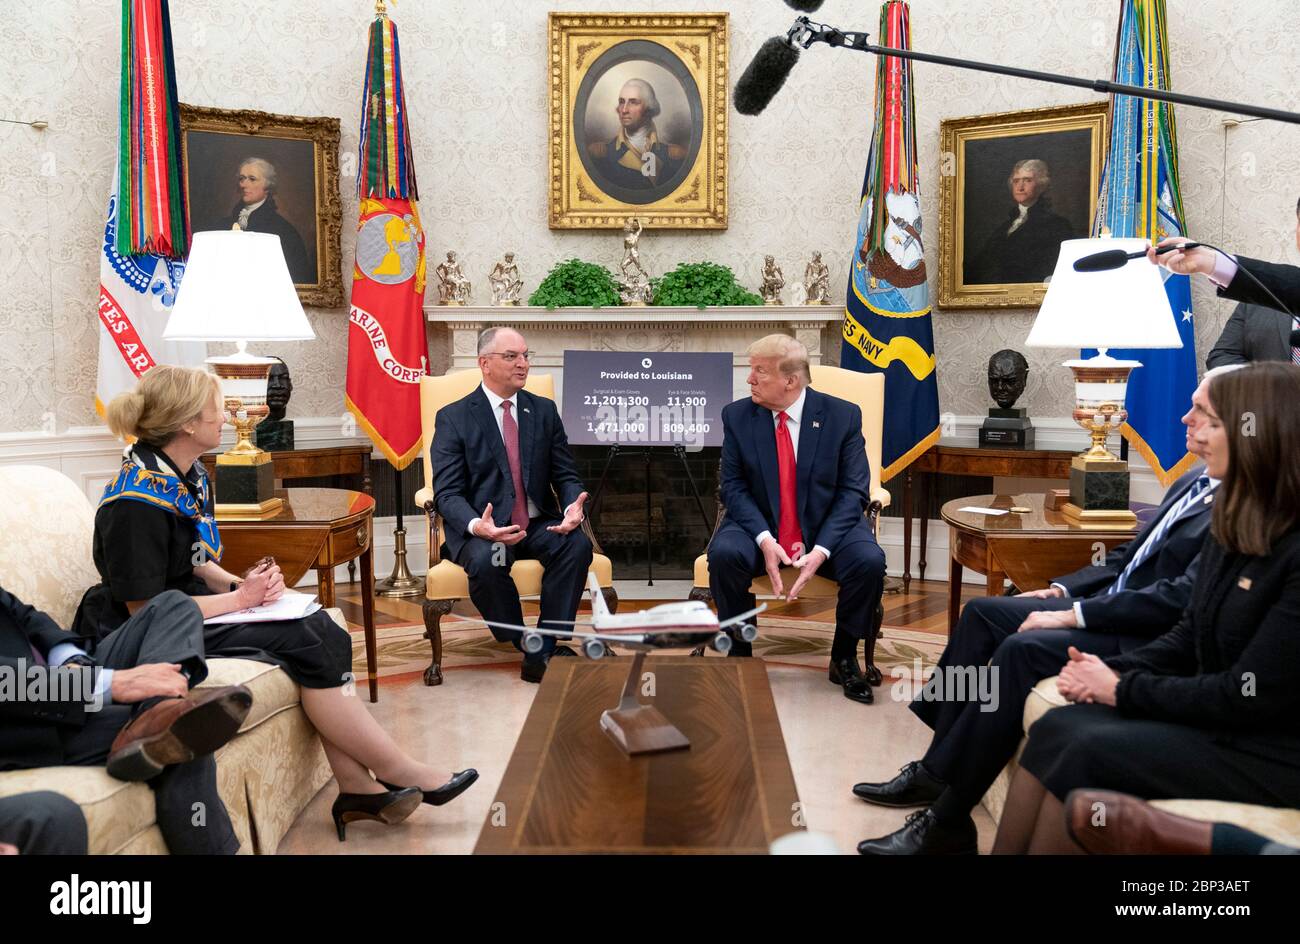 U.S. President Donald Trump meets with Louisiana Gov. John Bel Edwards to discuss the COVID-19, coronavirus pandemic in the Oval Office of the White House April 29, 2020 in Washington, D.C. Stock Photo